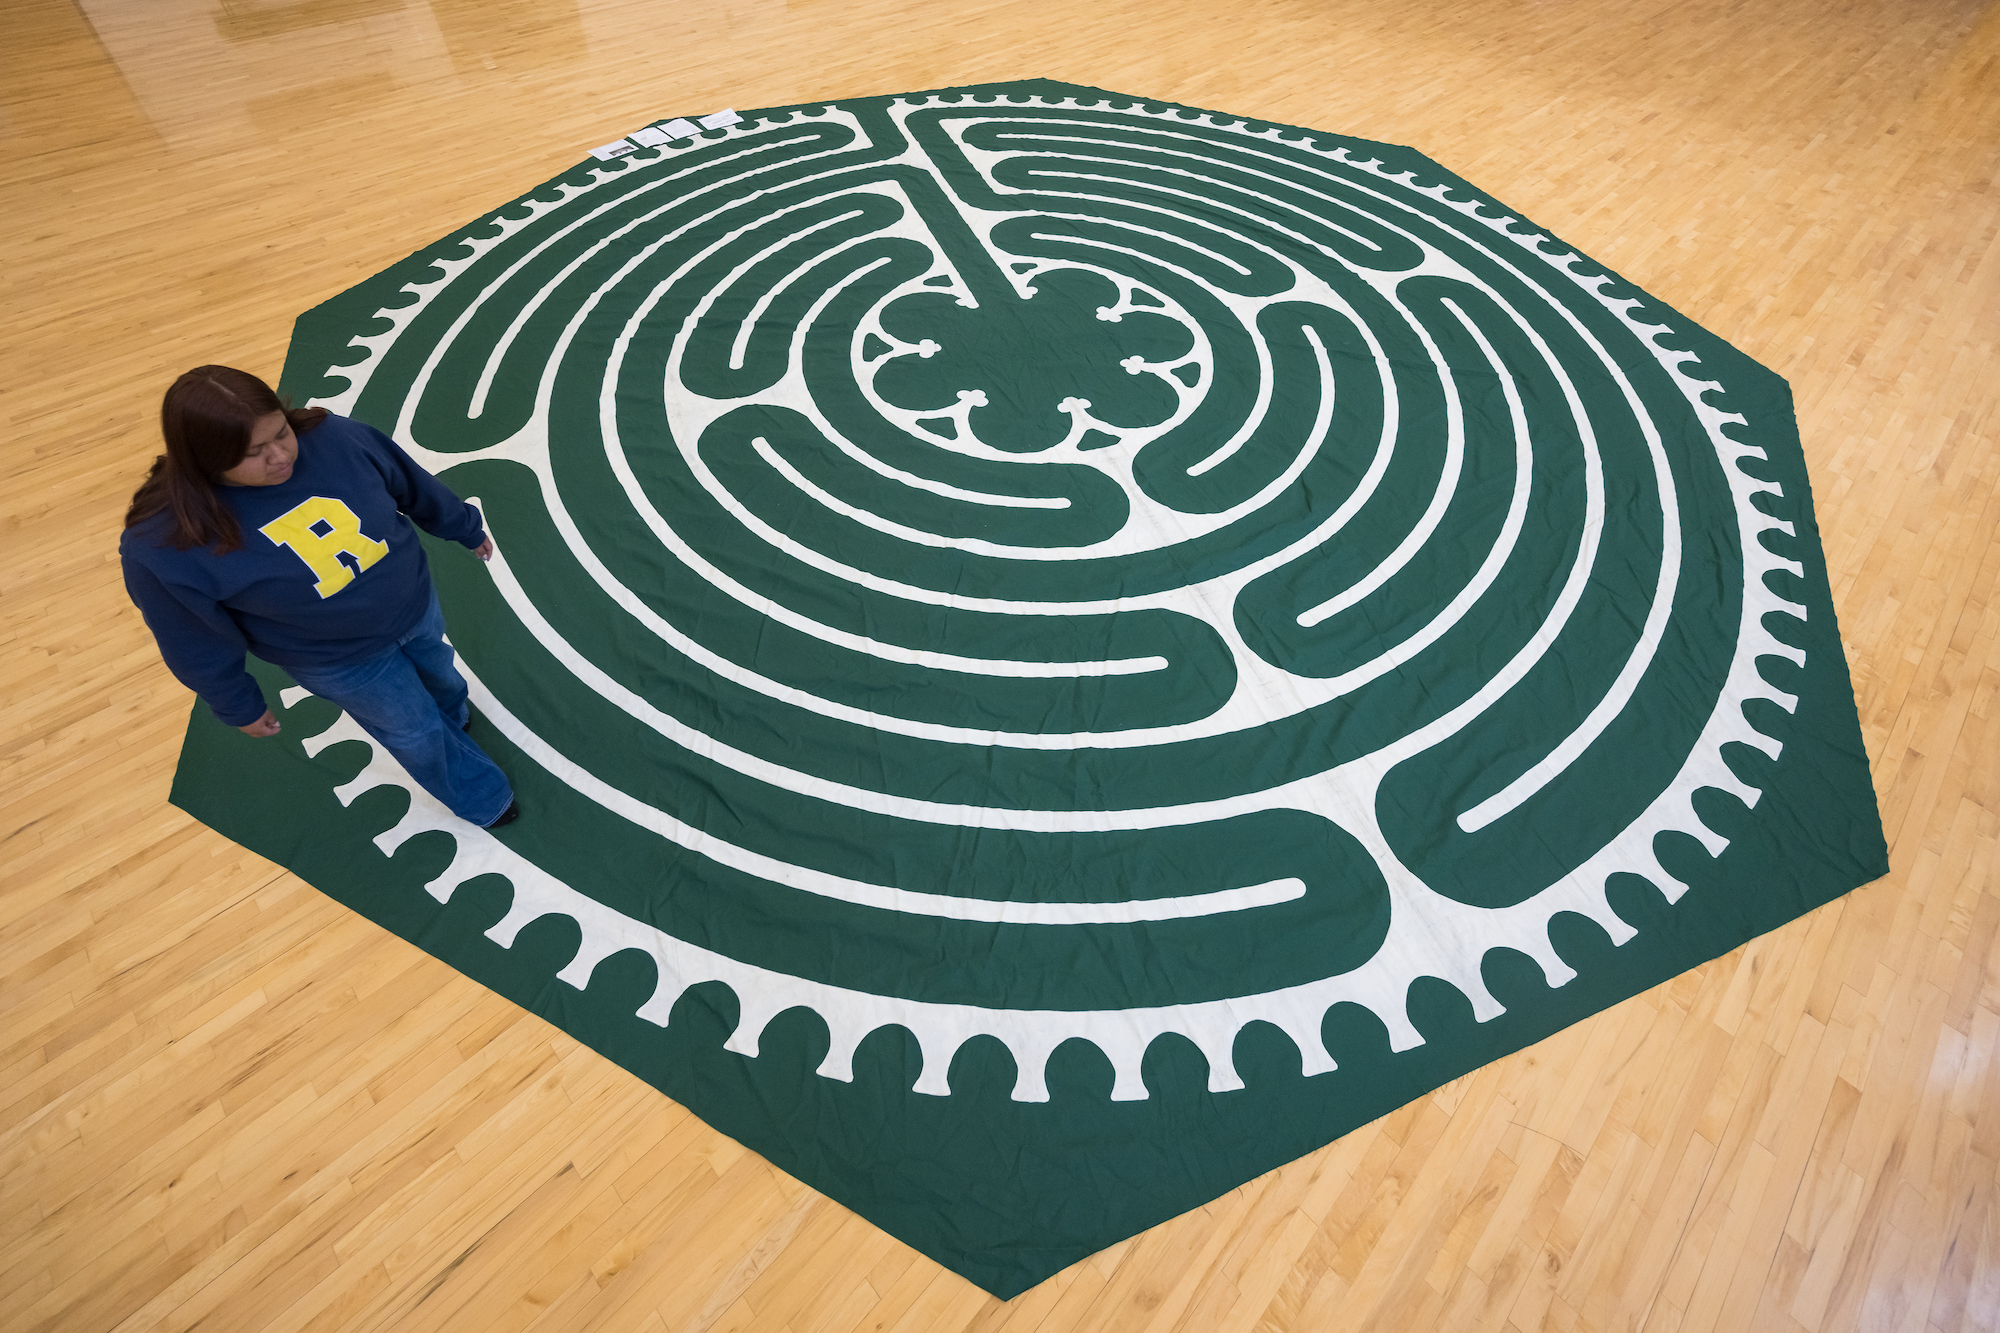 Student follows along a green and while floor labyrinth 